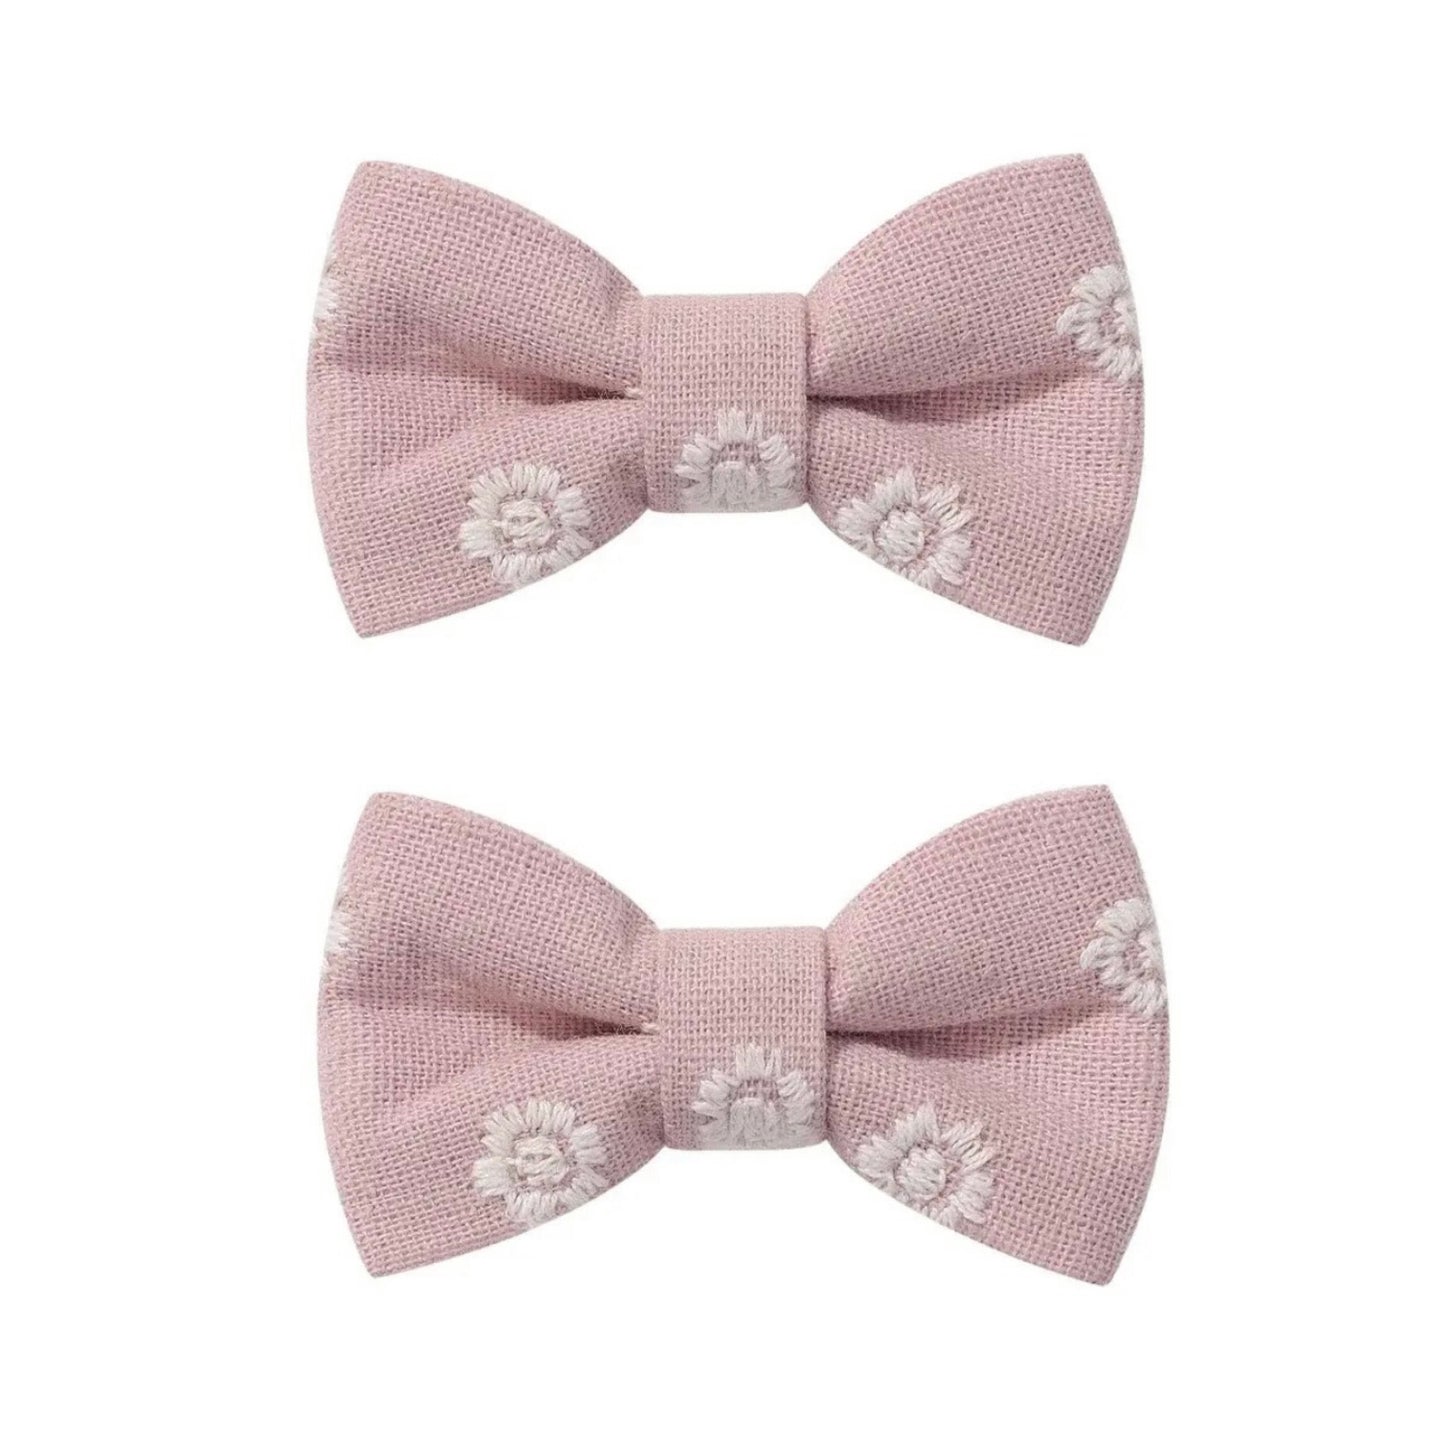 Vintage Embroidered Hair Bow Set